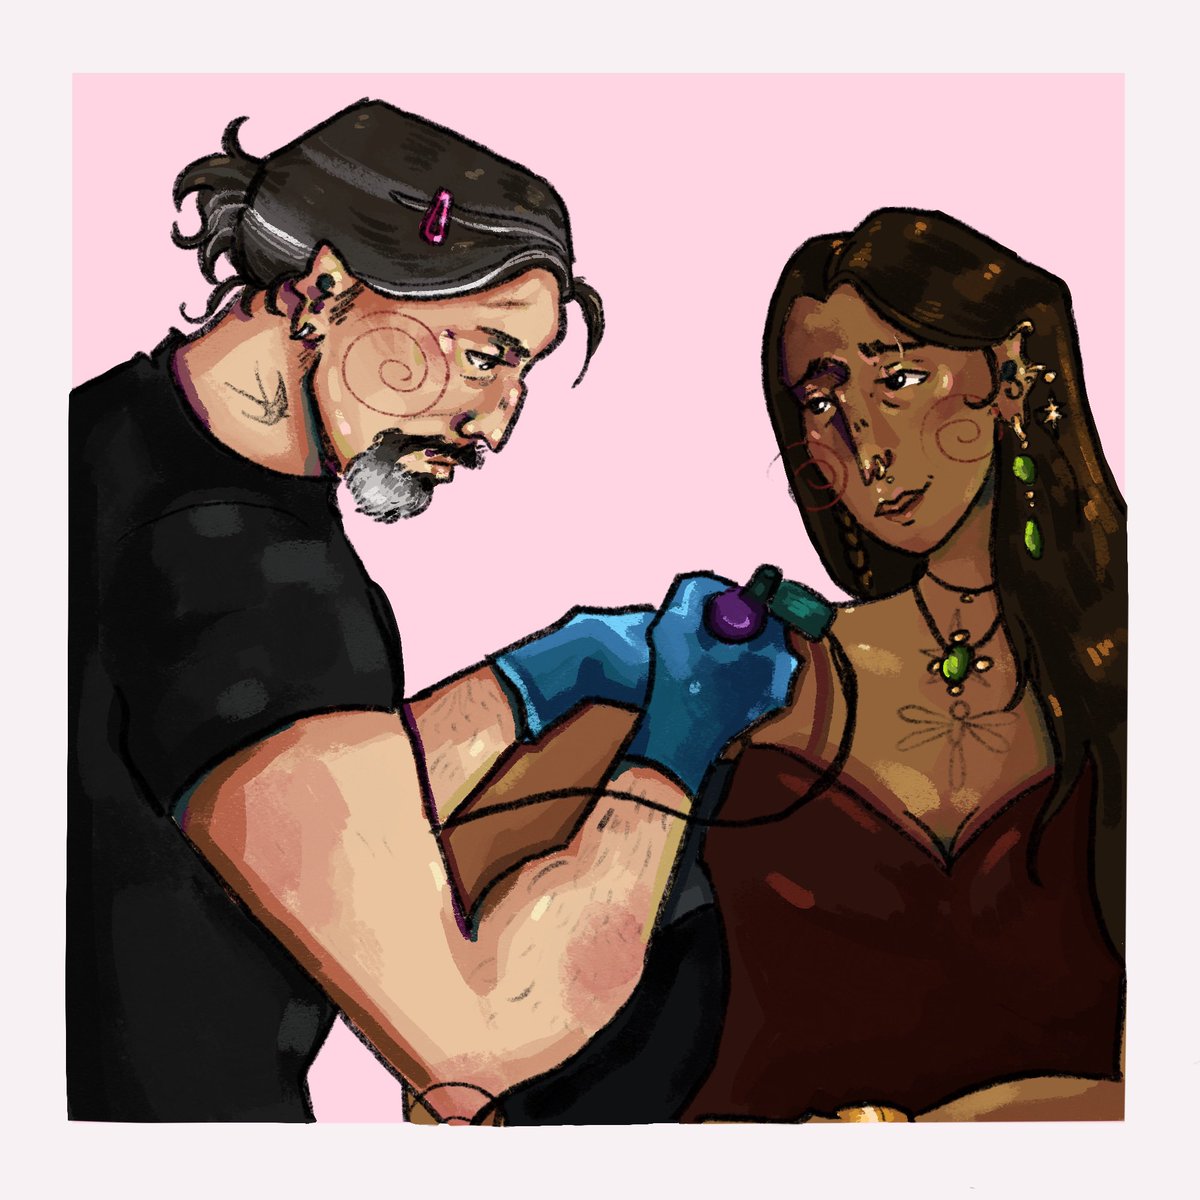 Little bit of my modern au!! Izzy is a tattoo artisans just got his license hehe (Eliza is the first one to get officially tatted and is a lil too proud of him) #OurFlagMeansDeath #IzzyHands